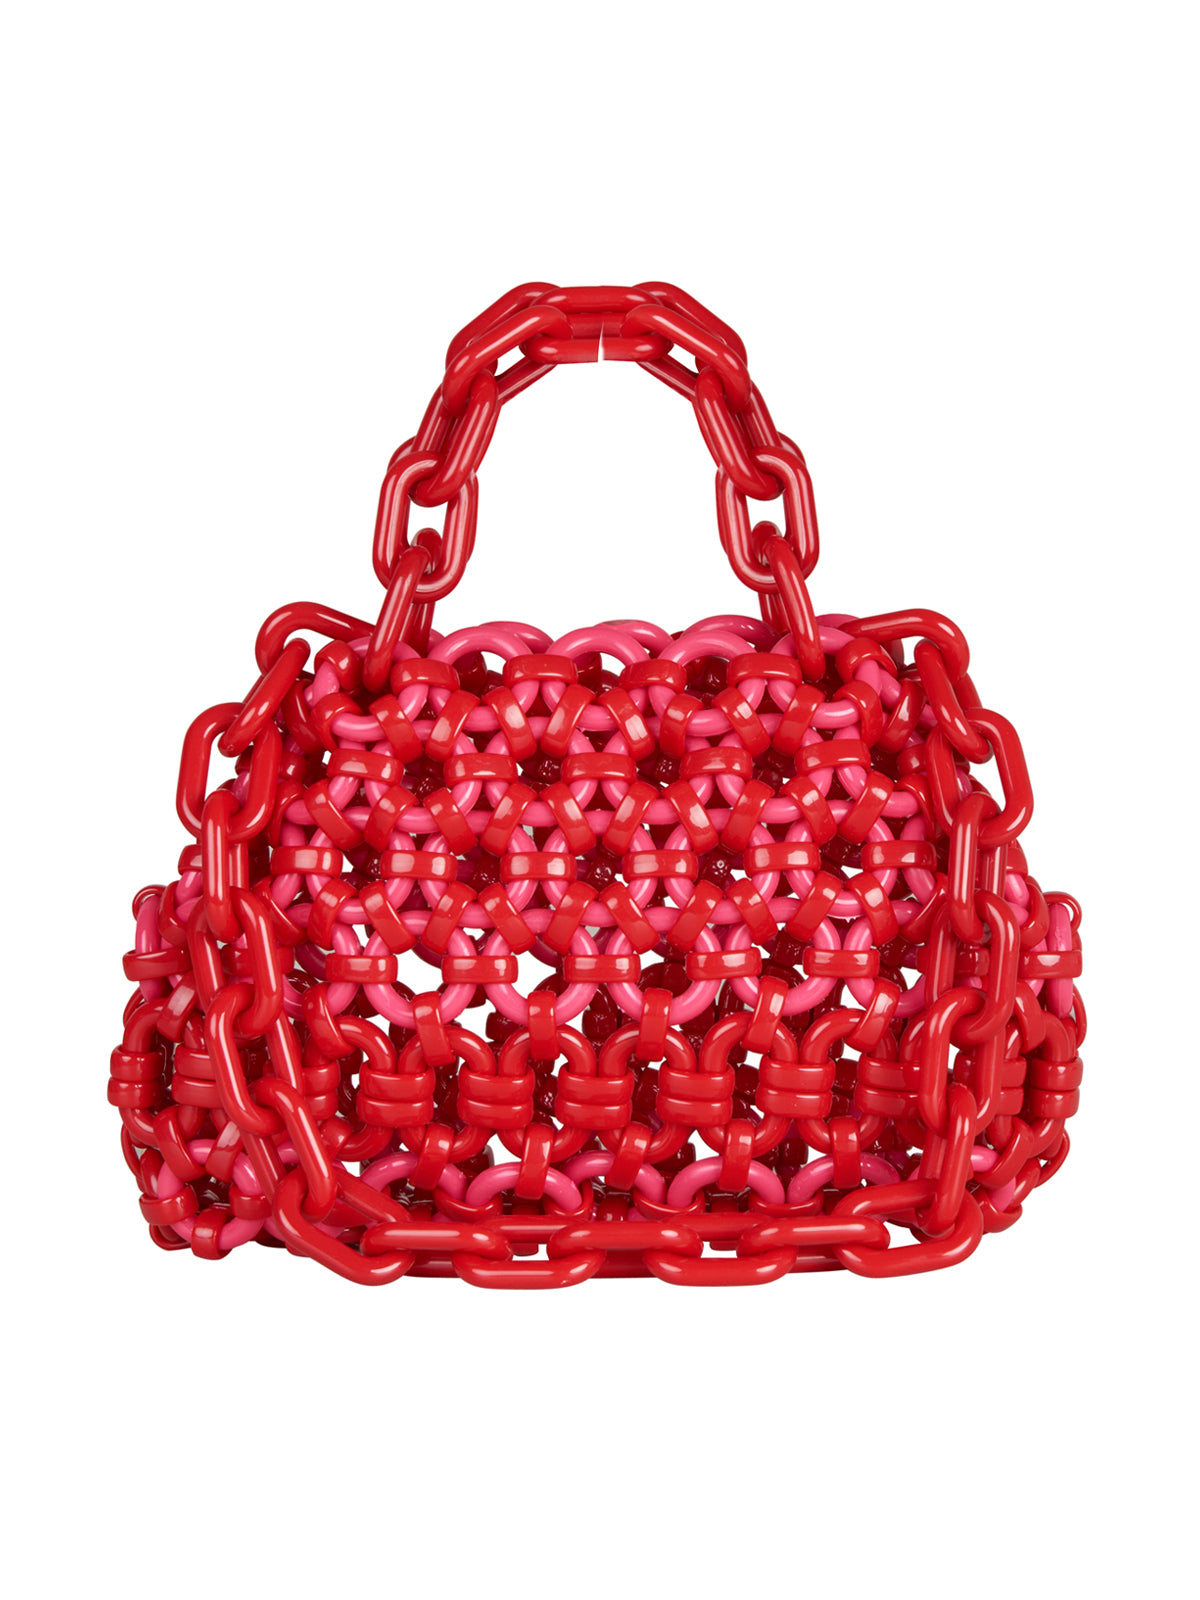 This Jasna Handbag Rouge Fuchsia with a chain handle will ship in a few days after ordering.